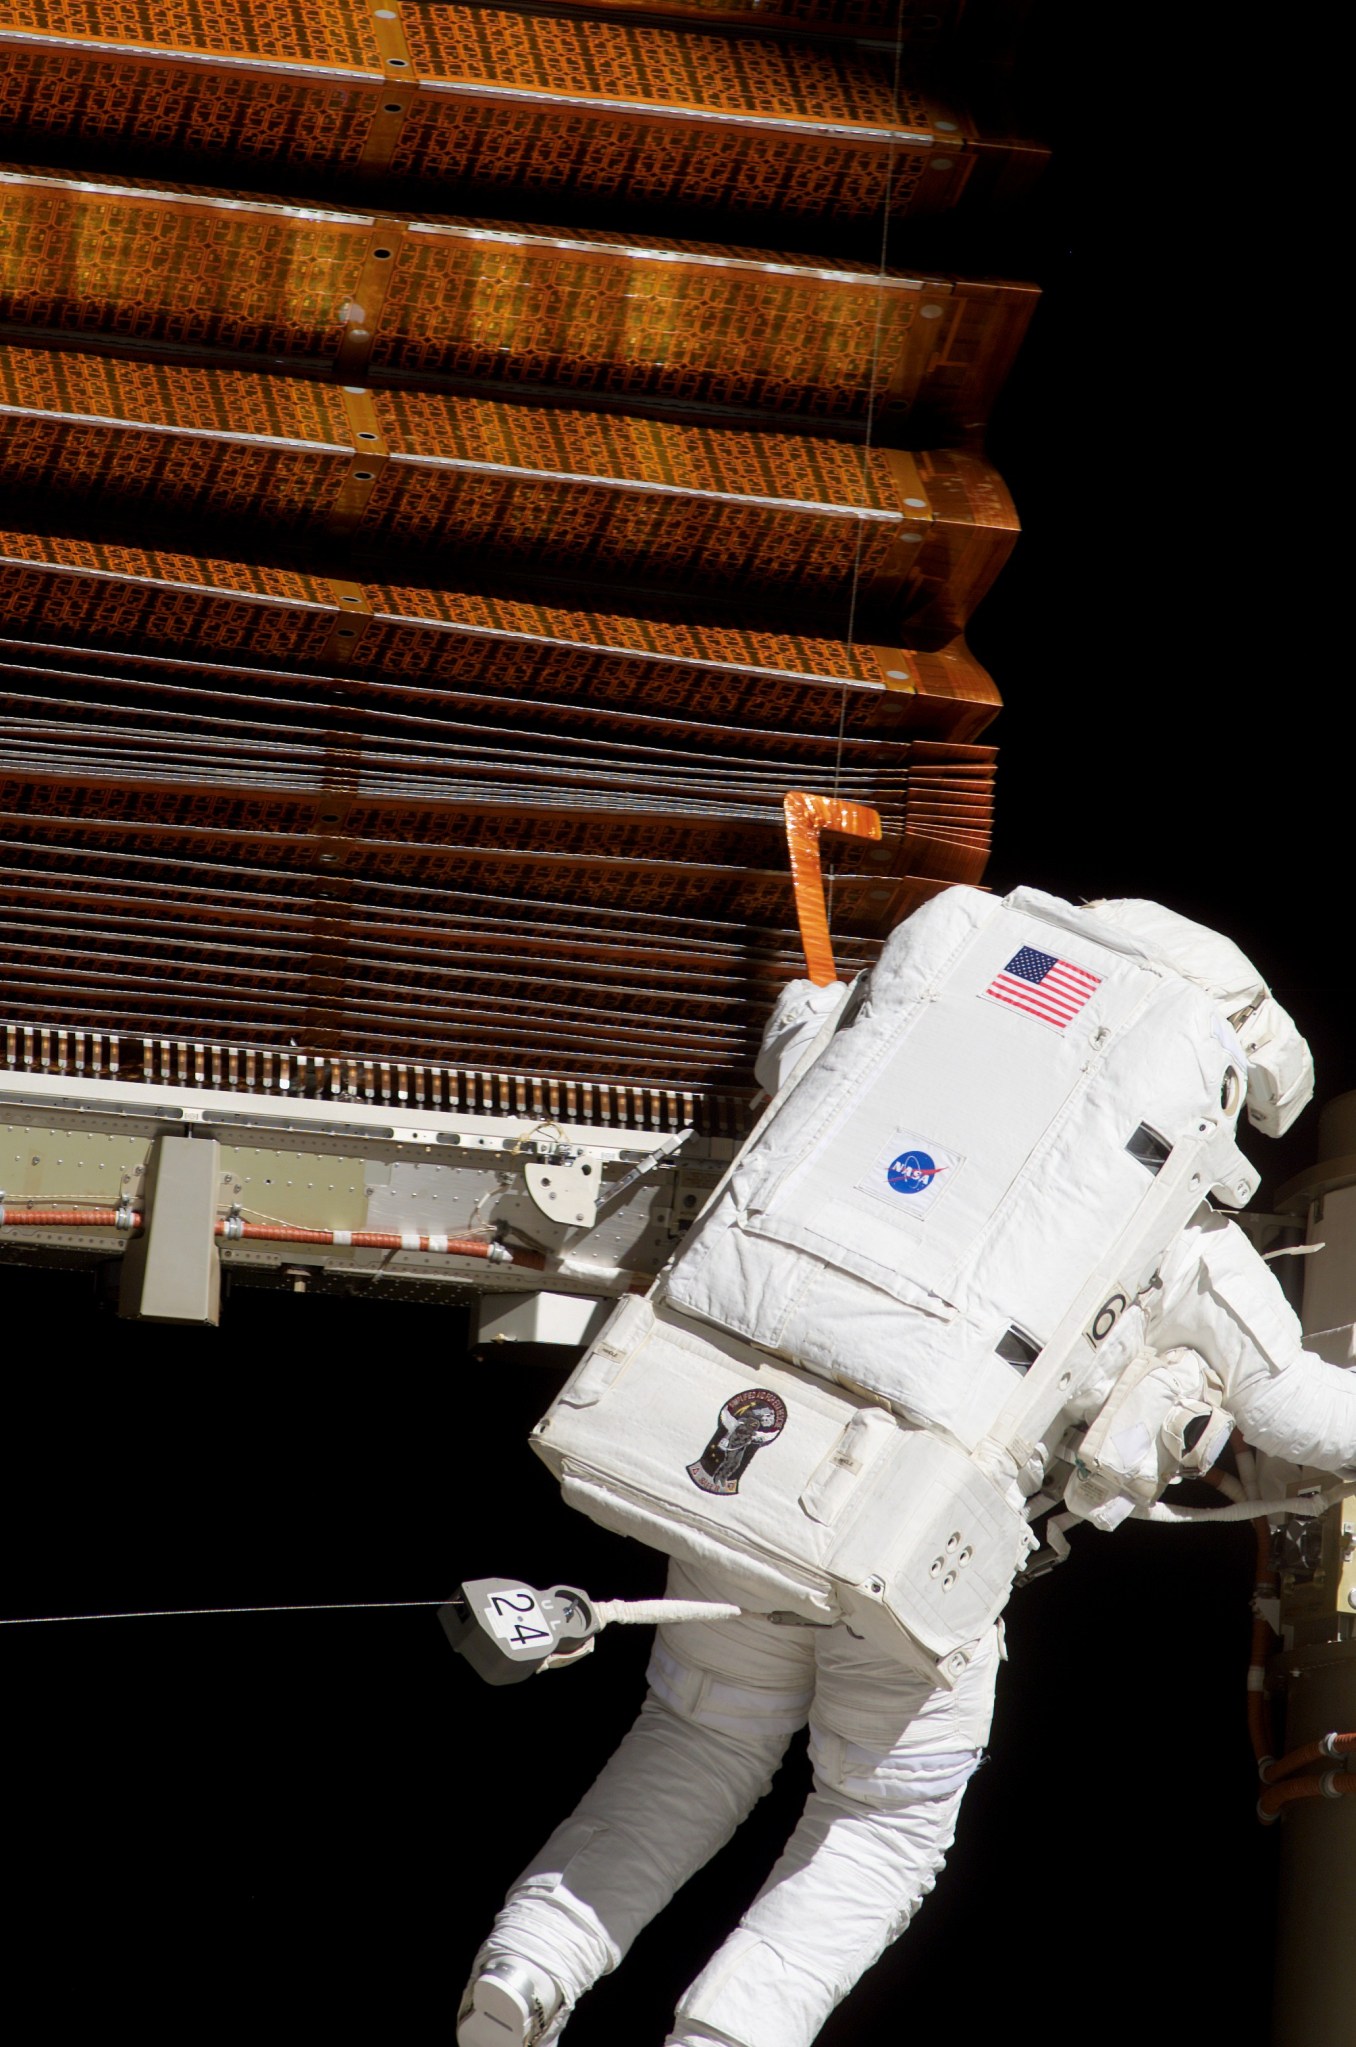 Astronaut works on solar array panel in space.